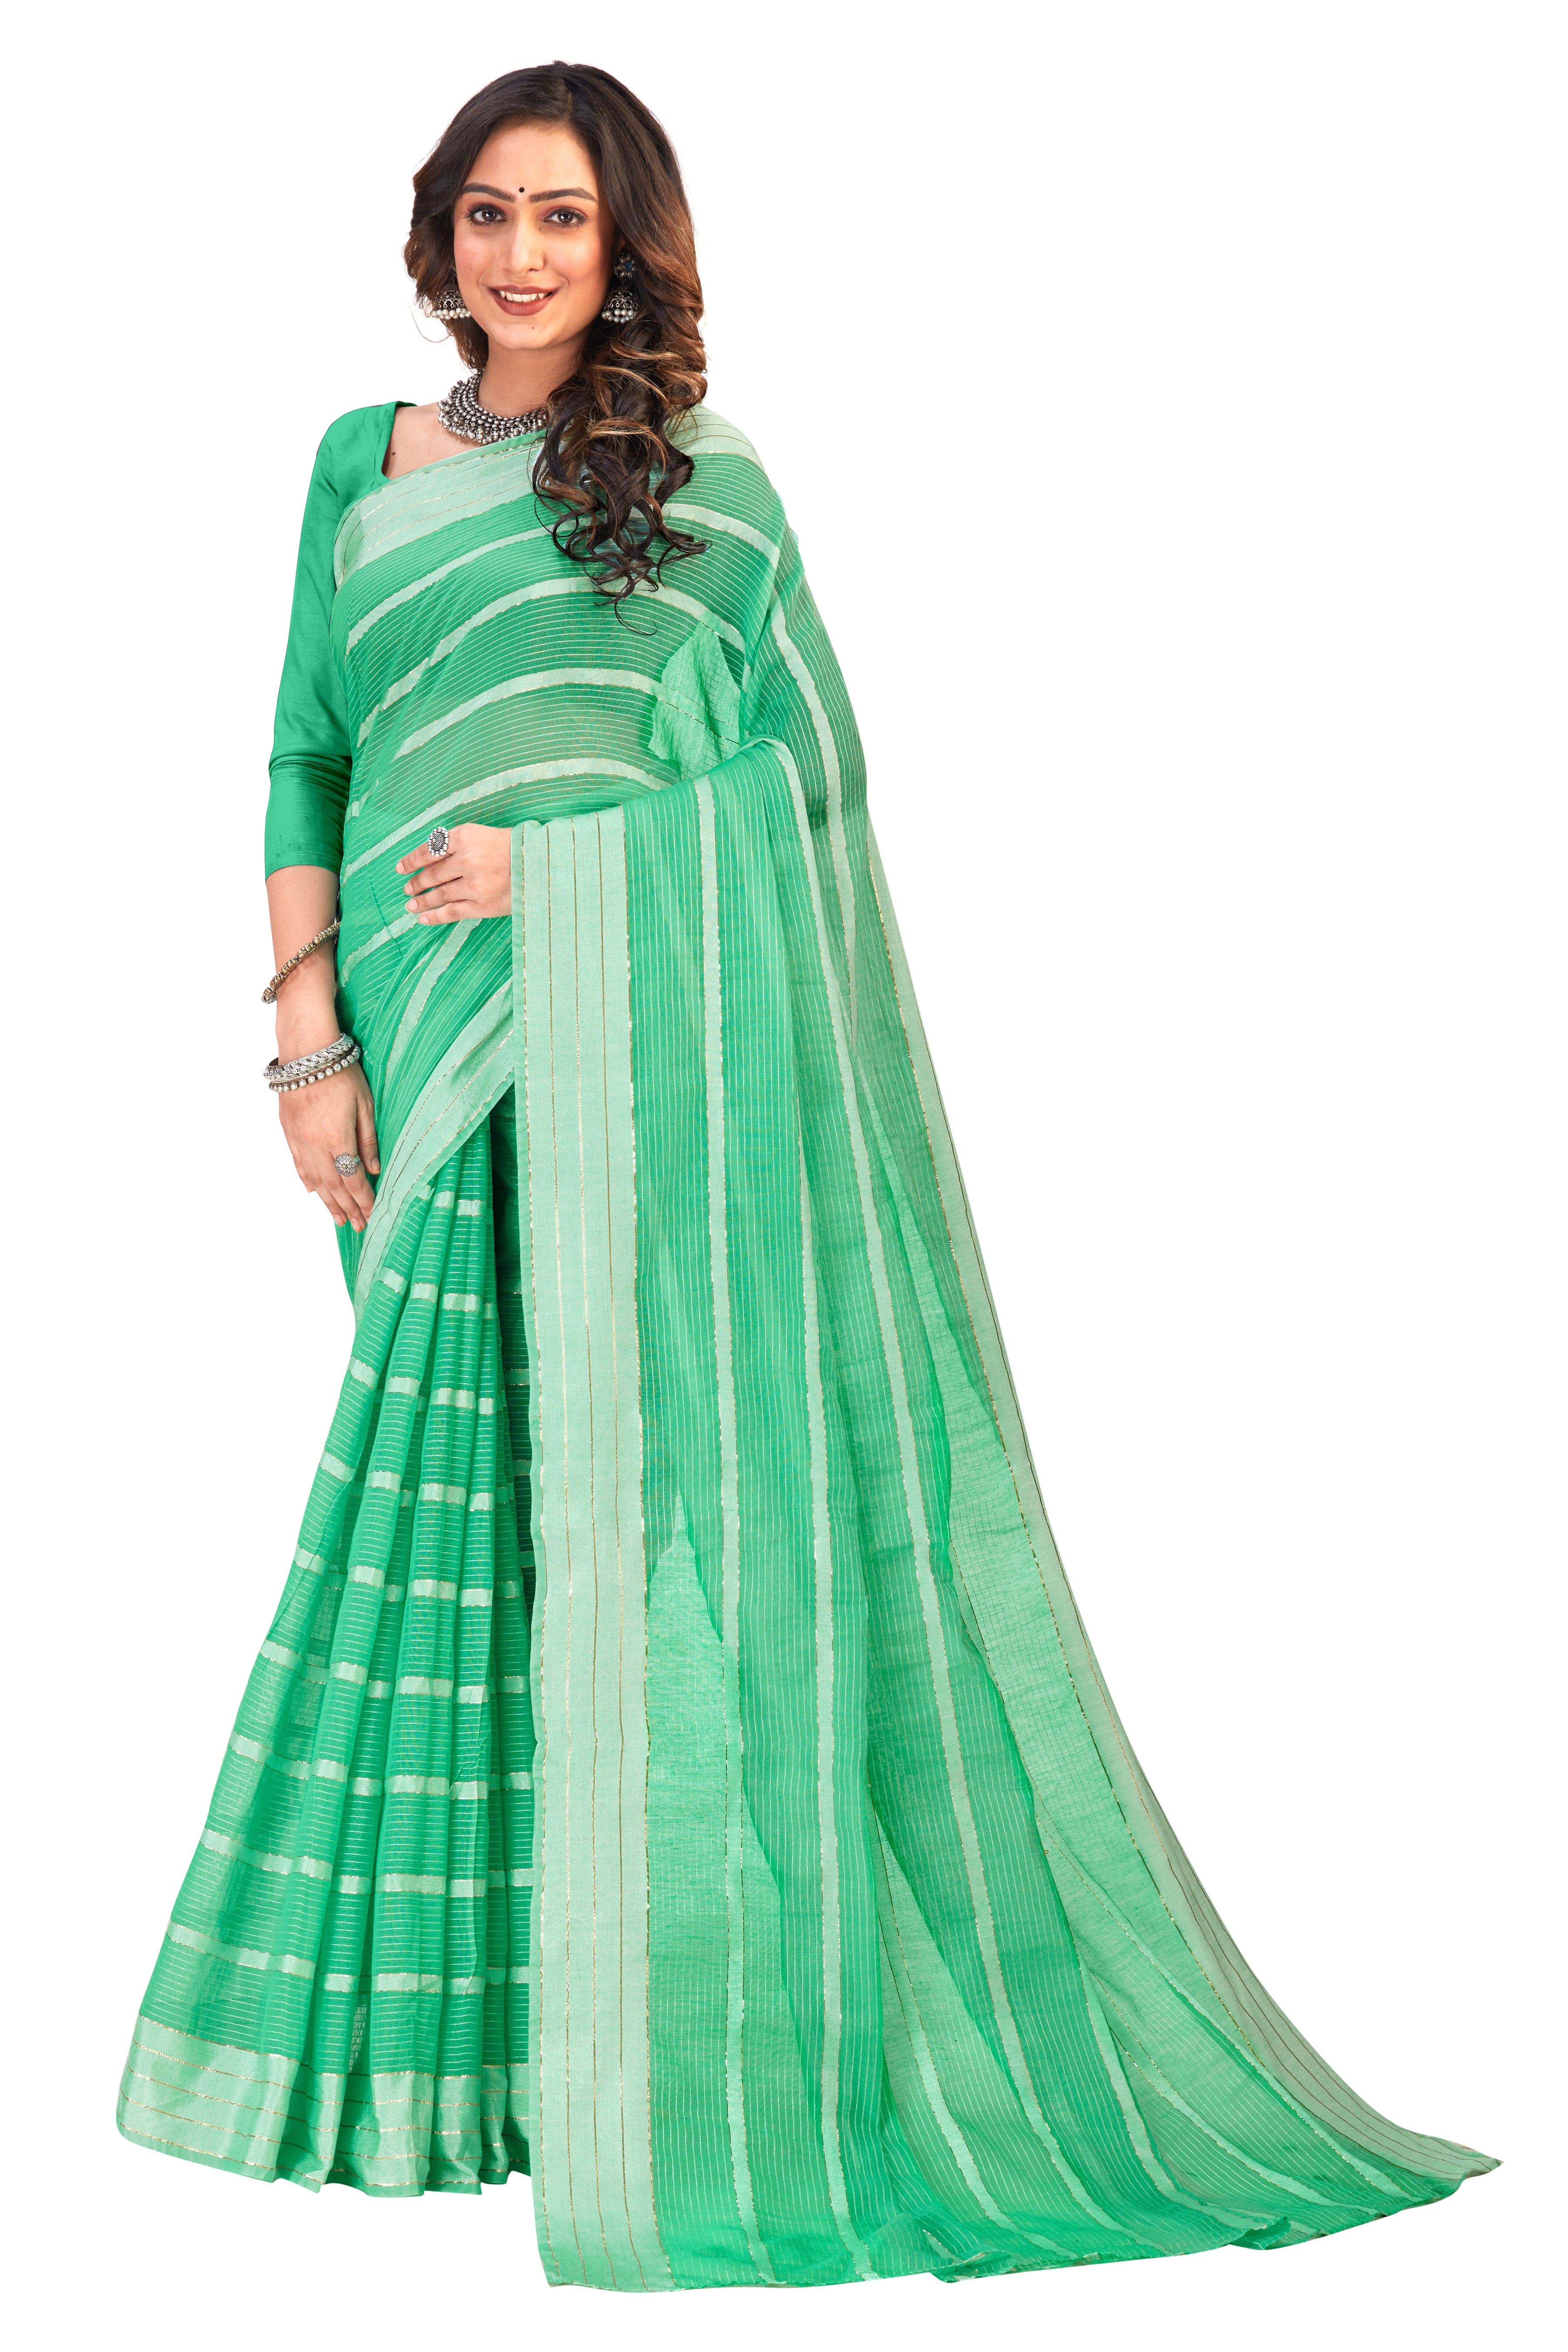 Women's self Woven striped Daily Wear Cotton Blend Sari With Blouse Piece (Rama) - NIMIDHYA